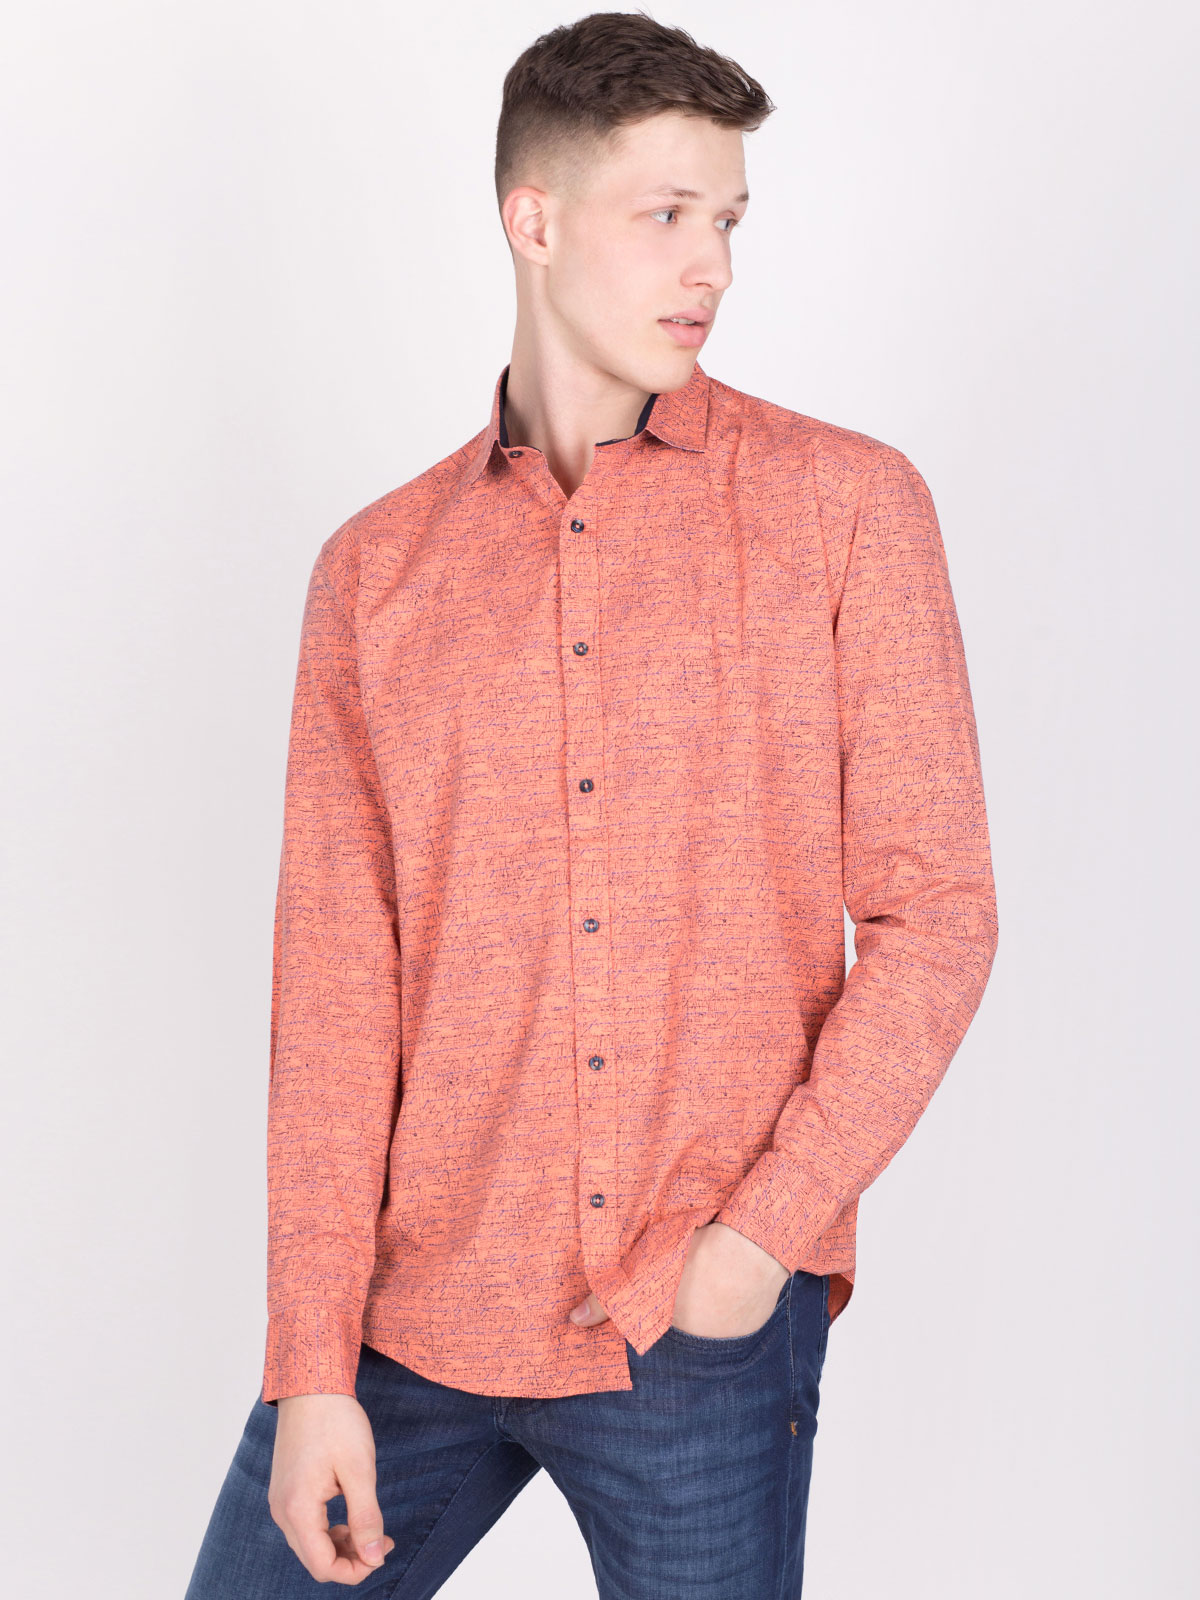 Shirt in orange with spectacular print - 21466 € 21.93 img2